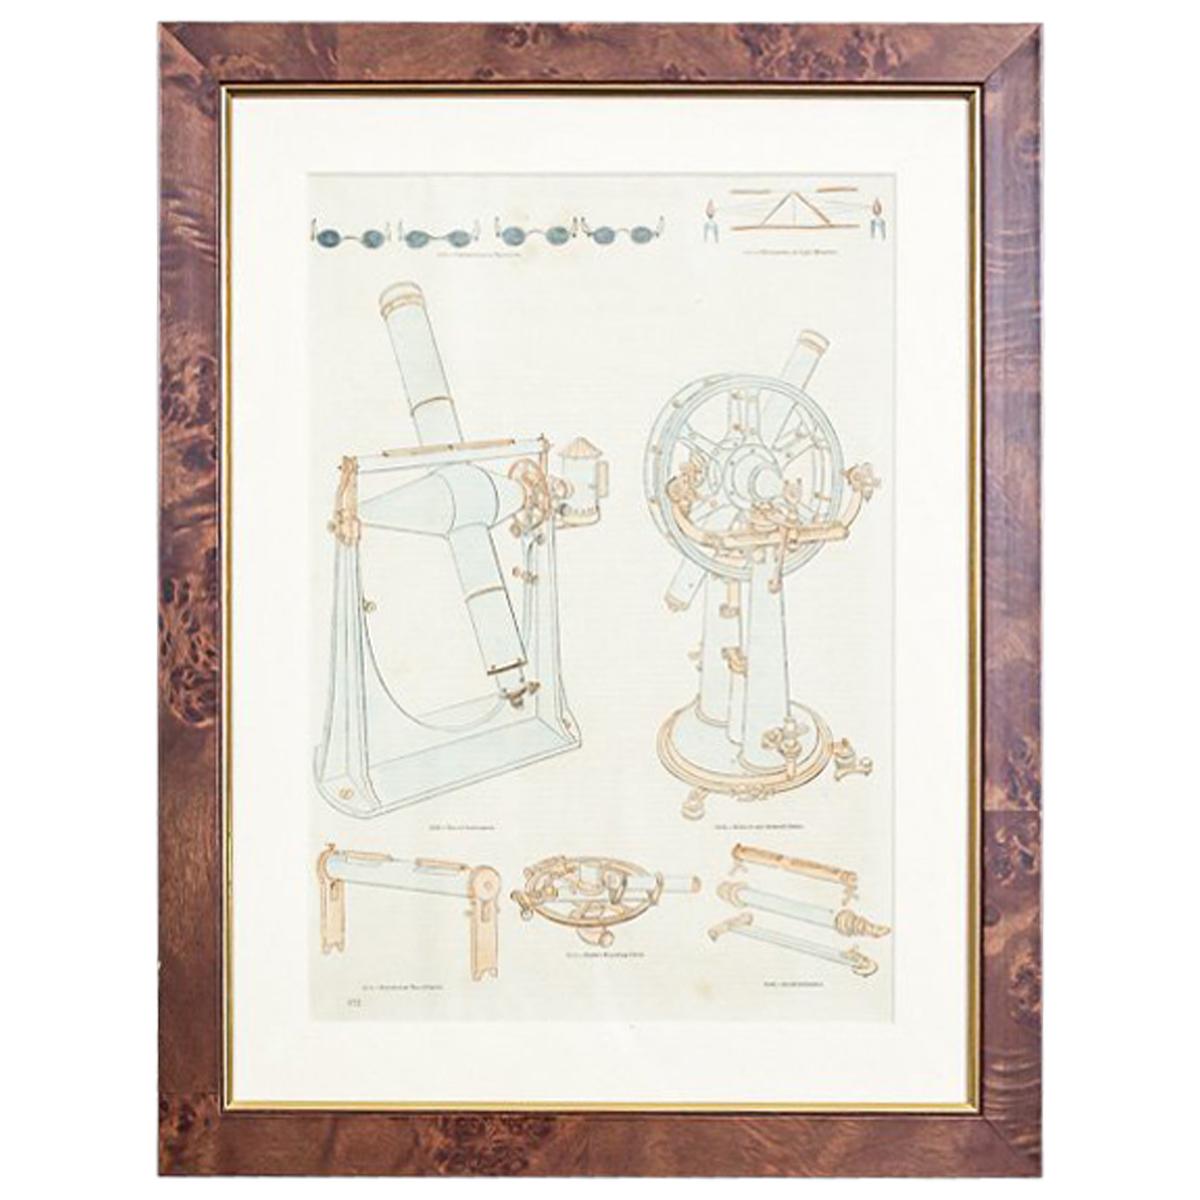 20th Century Colorful Print in Frame Depicting Telescopes